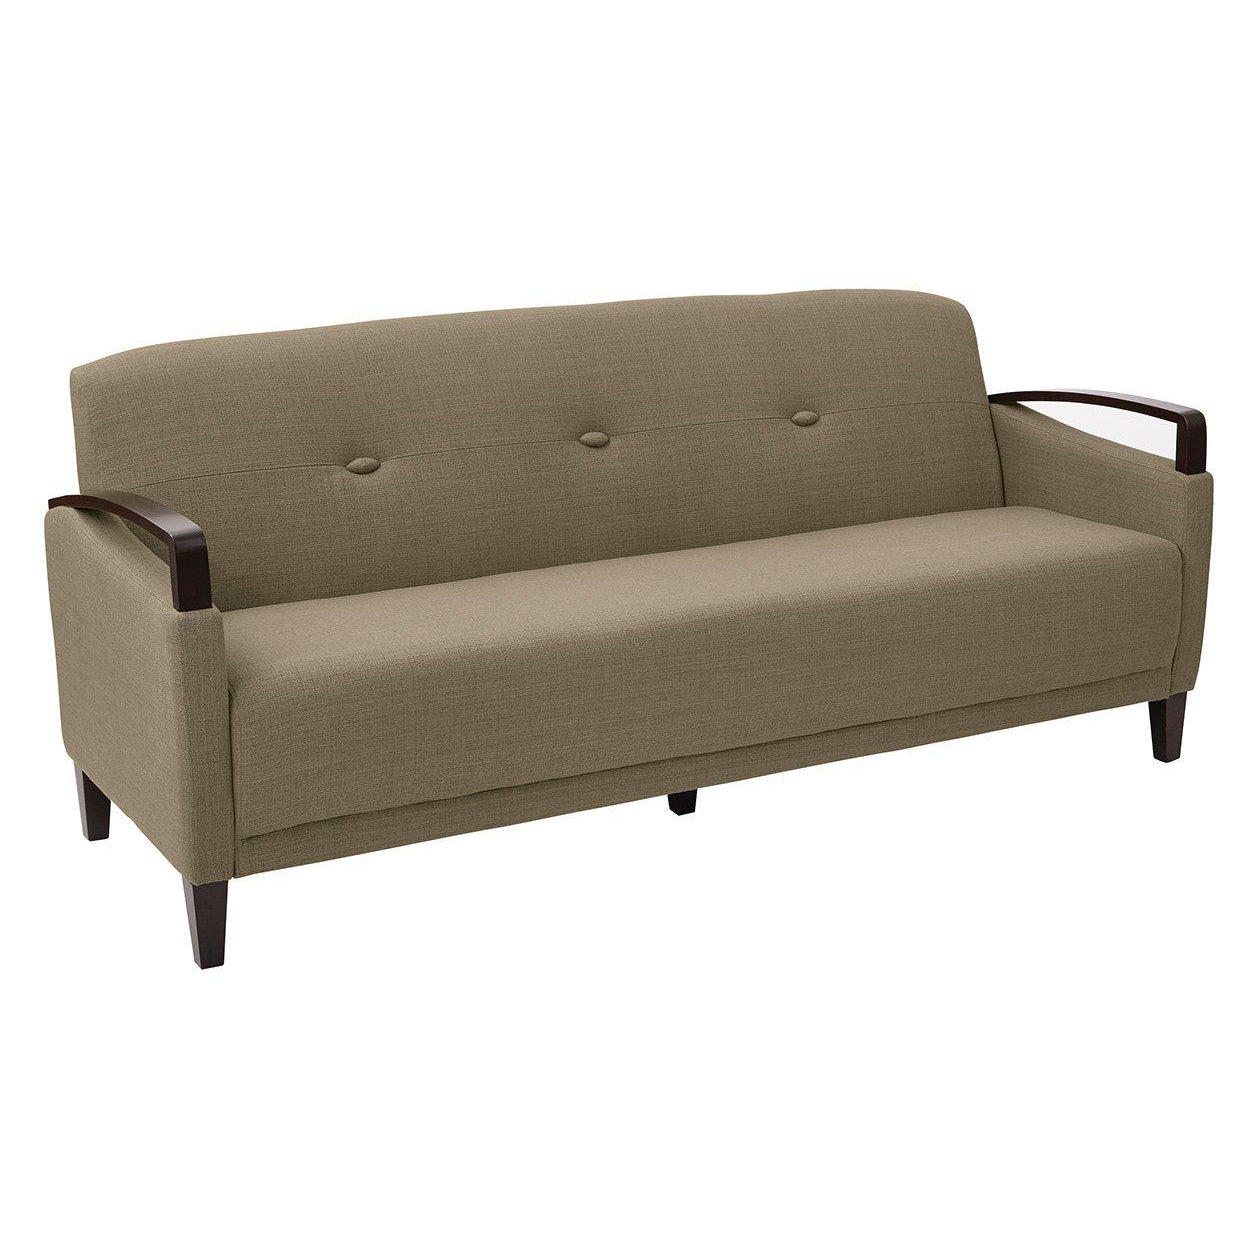 Main Street Sofa with Espresso Finish and 2-Tone Upholstery